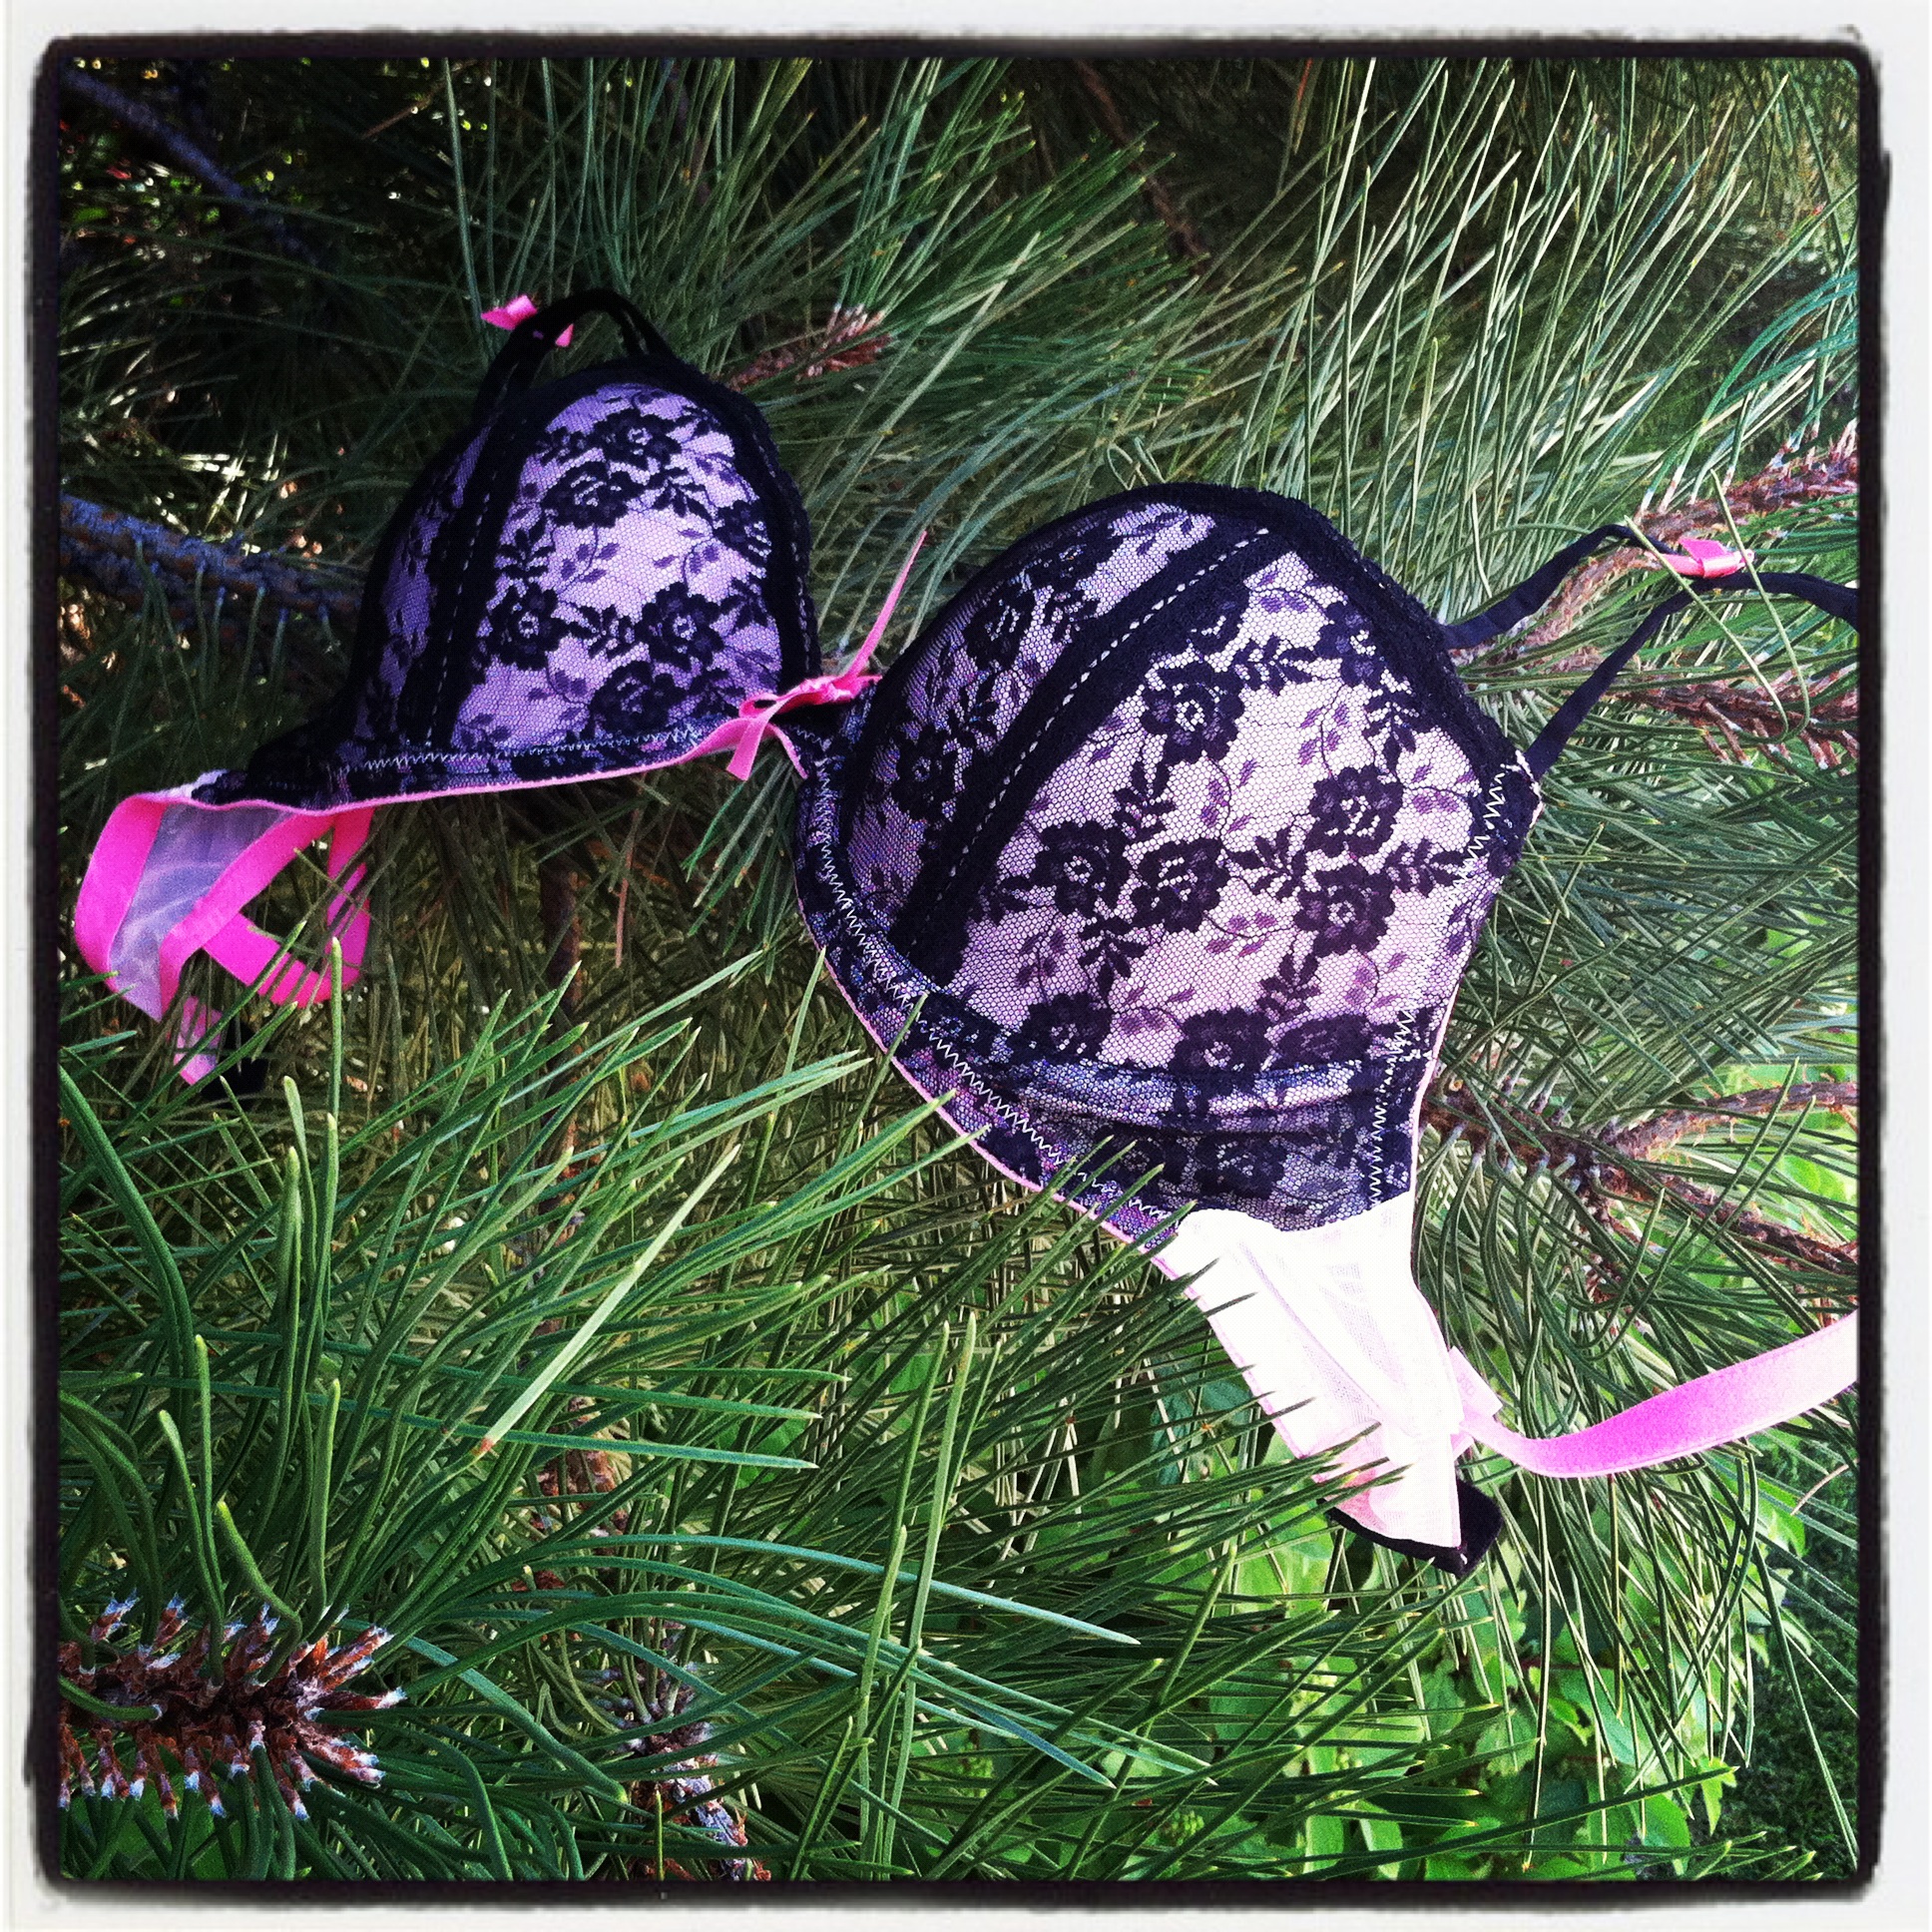 Is That Your Daughter's Bra Hanging From A Tree?